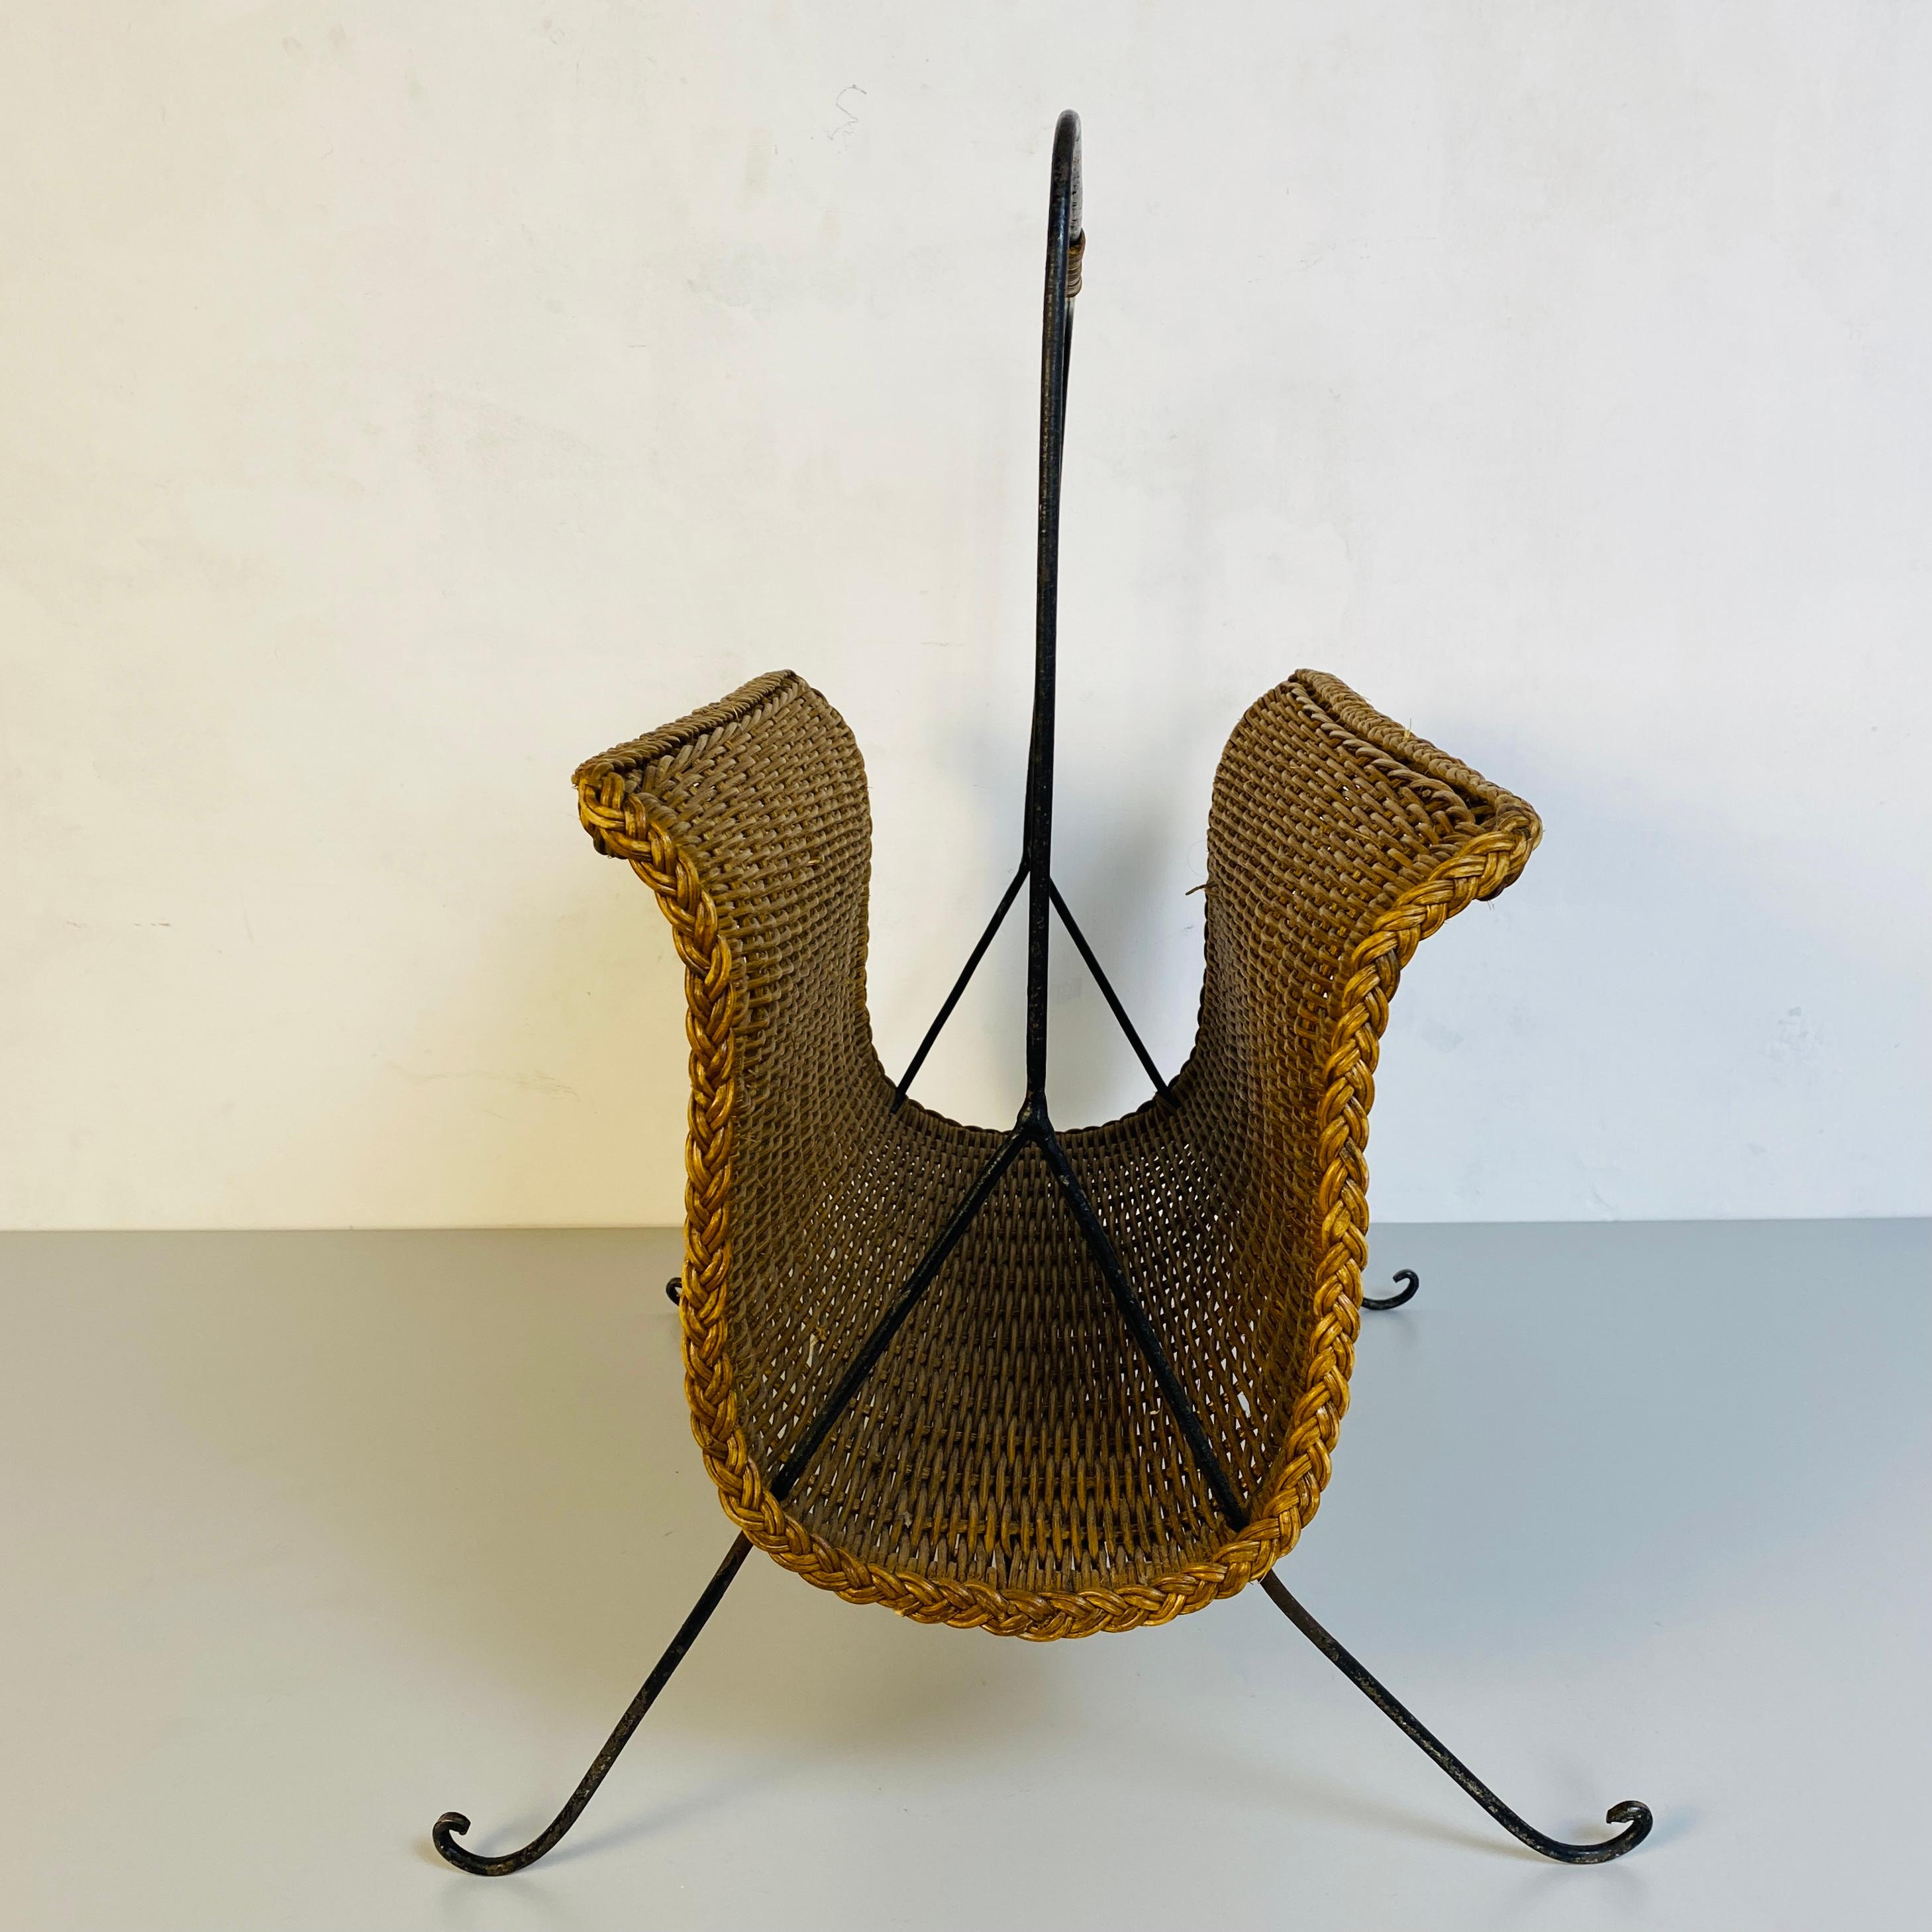 Late 20th Century Italian Mid-Century Modern Straw Magazine Rack with Metal Structure, 1970s For Sale